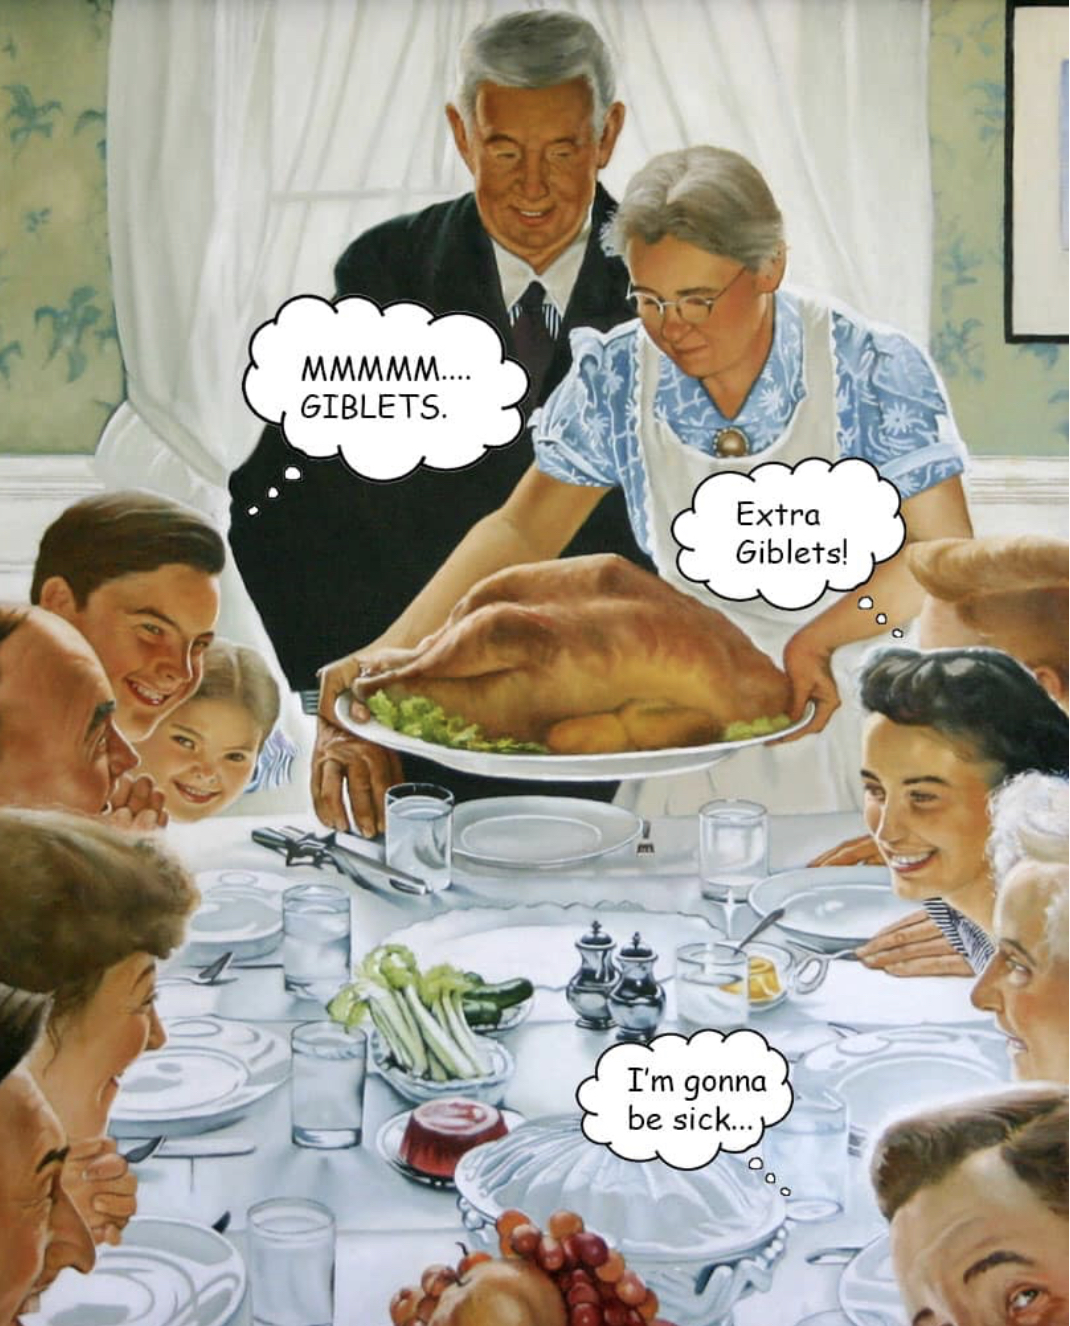 Norman Rockwell’s Thanksgiving' feast with a serving in of giblets